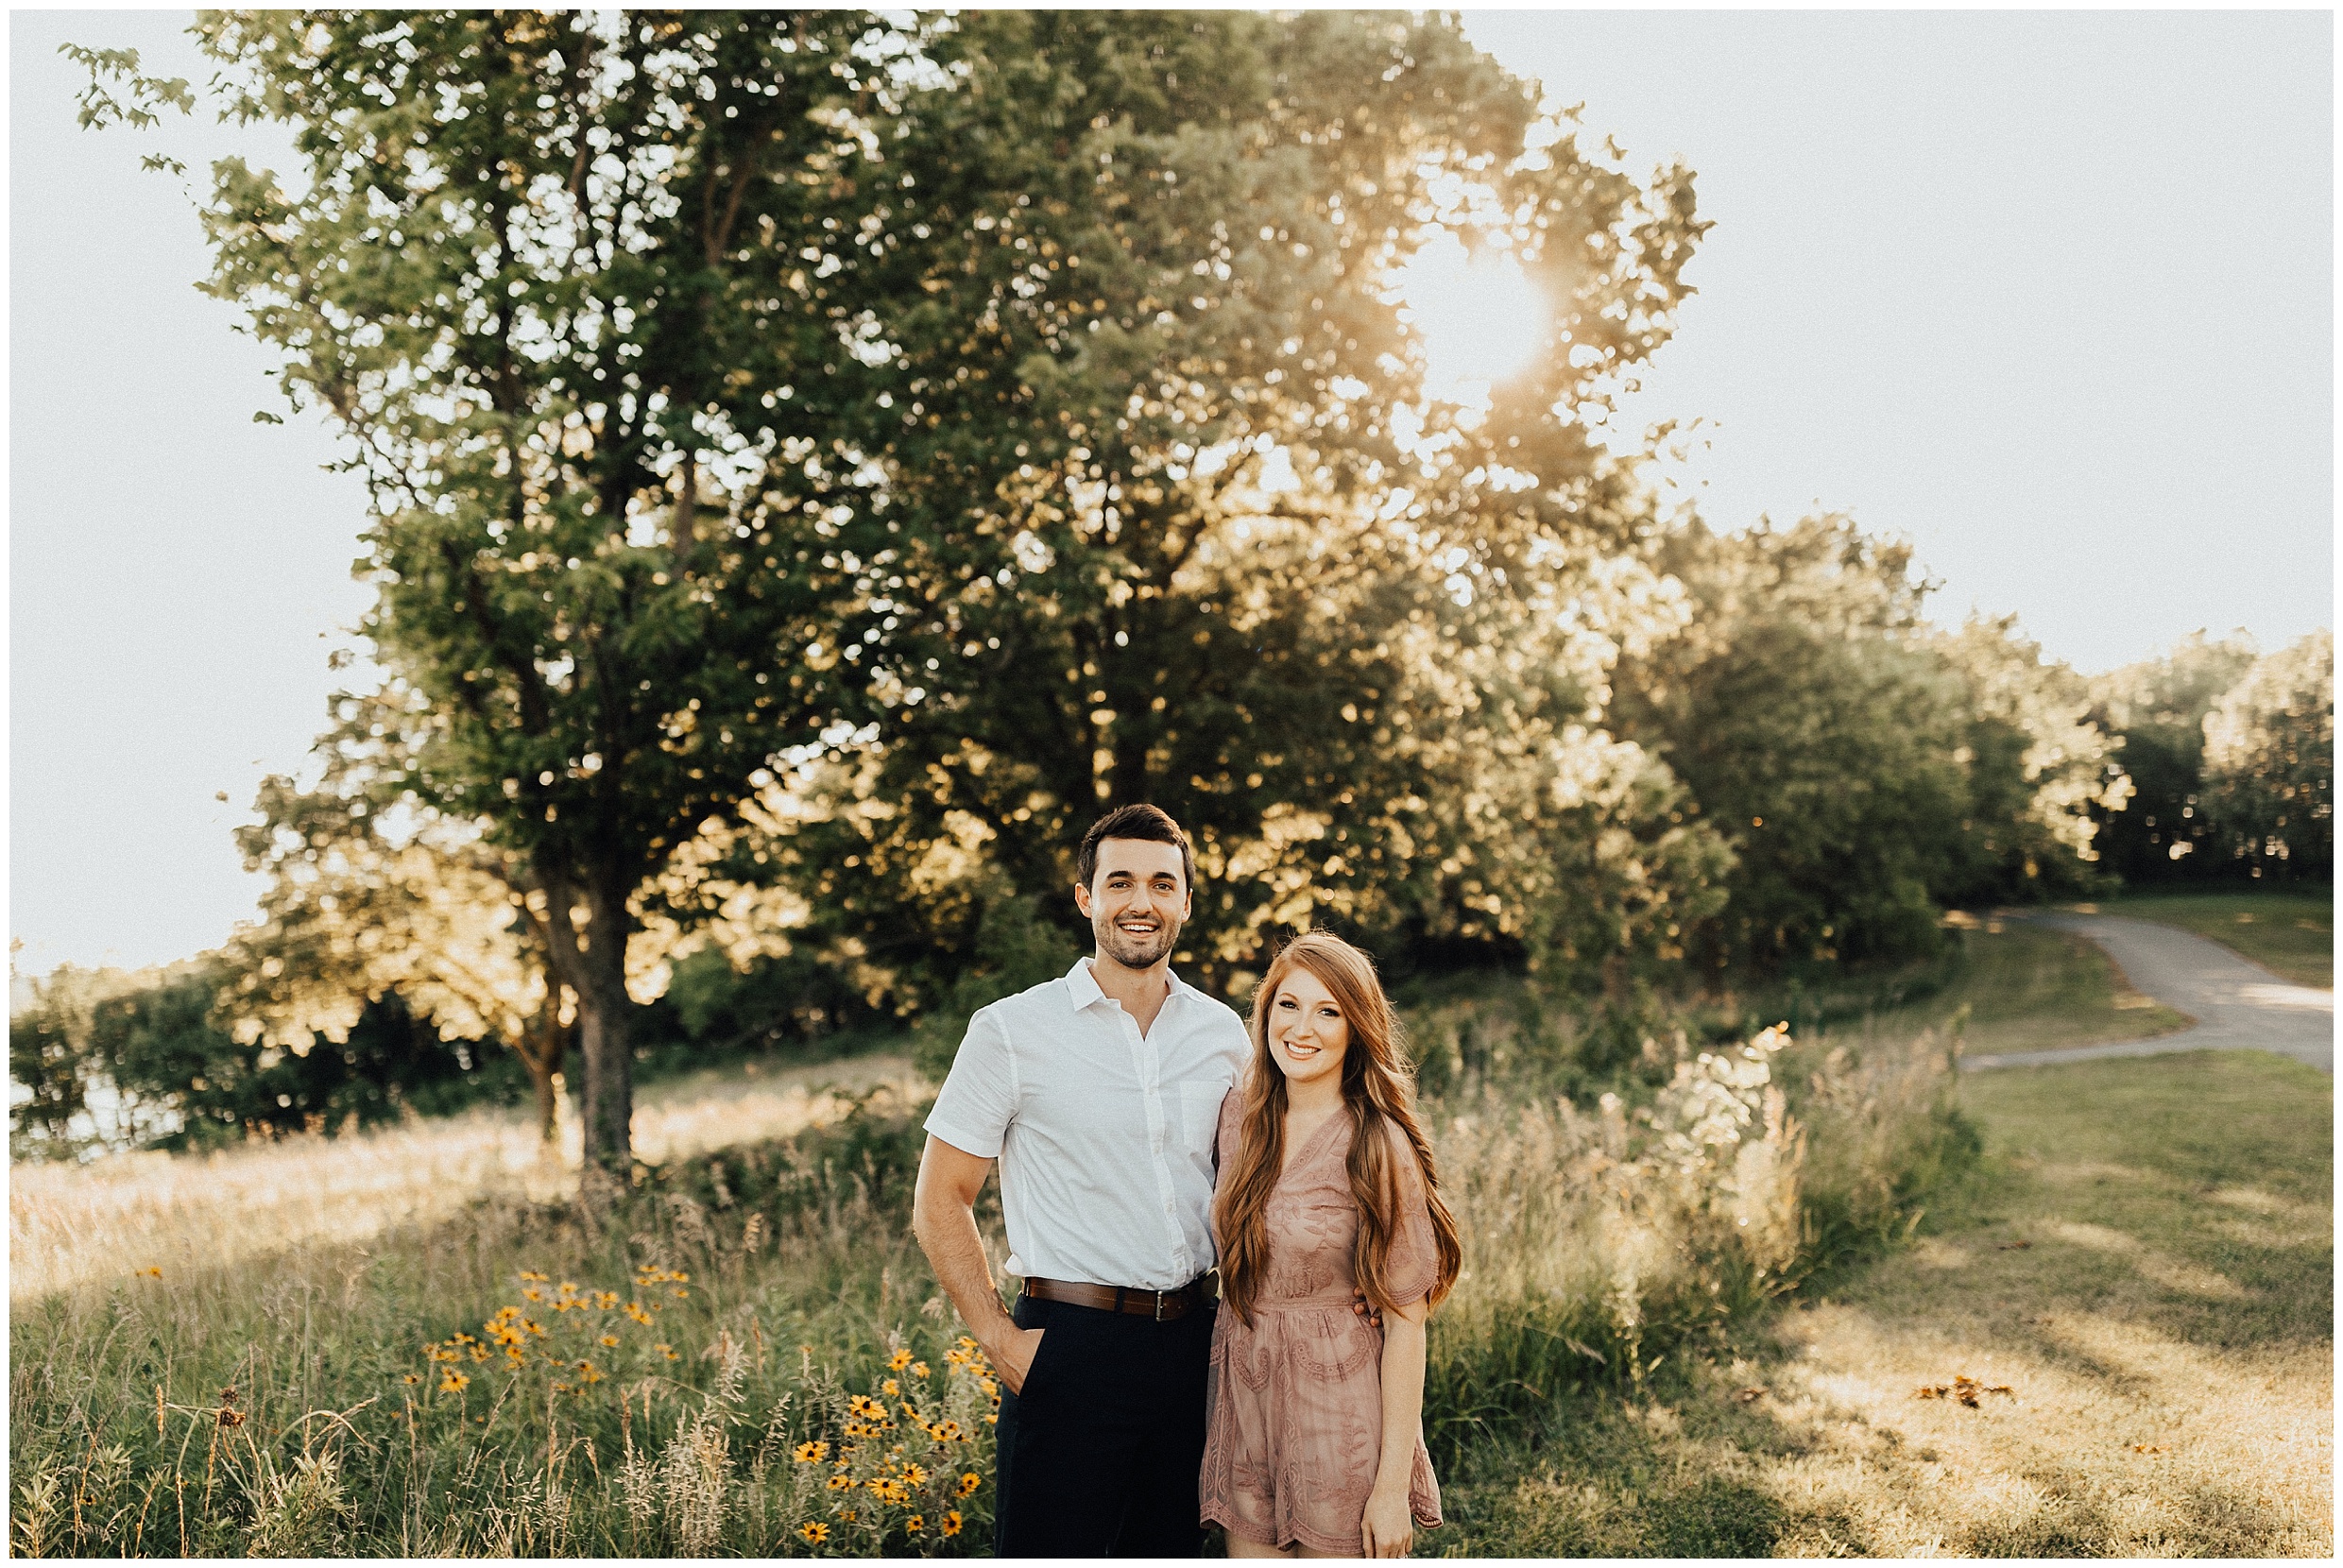 Engagement photos, what to wear for engagement session, save the date, couples posing, engagement photo ideas, Kansas City engagement photos, Kansas city engagement photographer, Smithville lake engagement session